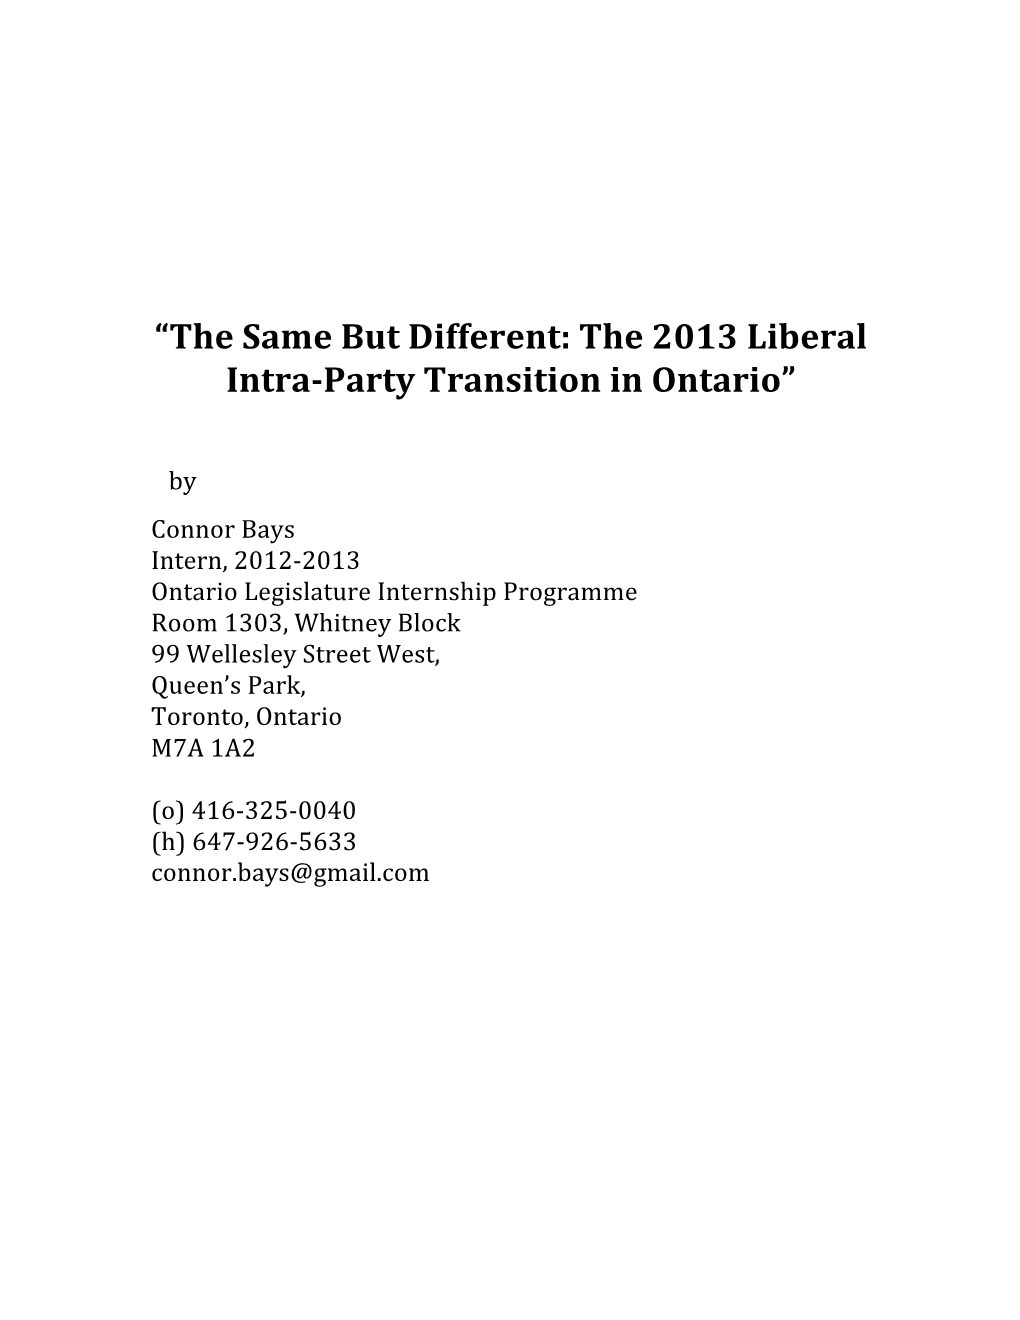 The 2013 Liberal Intra-‐Party Transition in Ontario